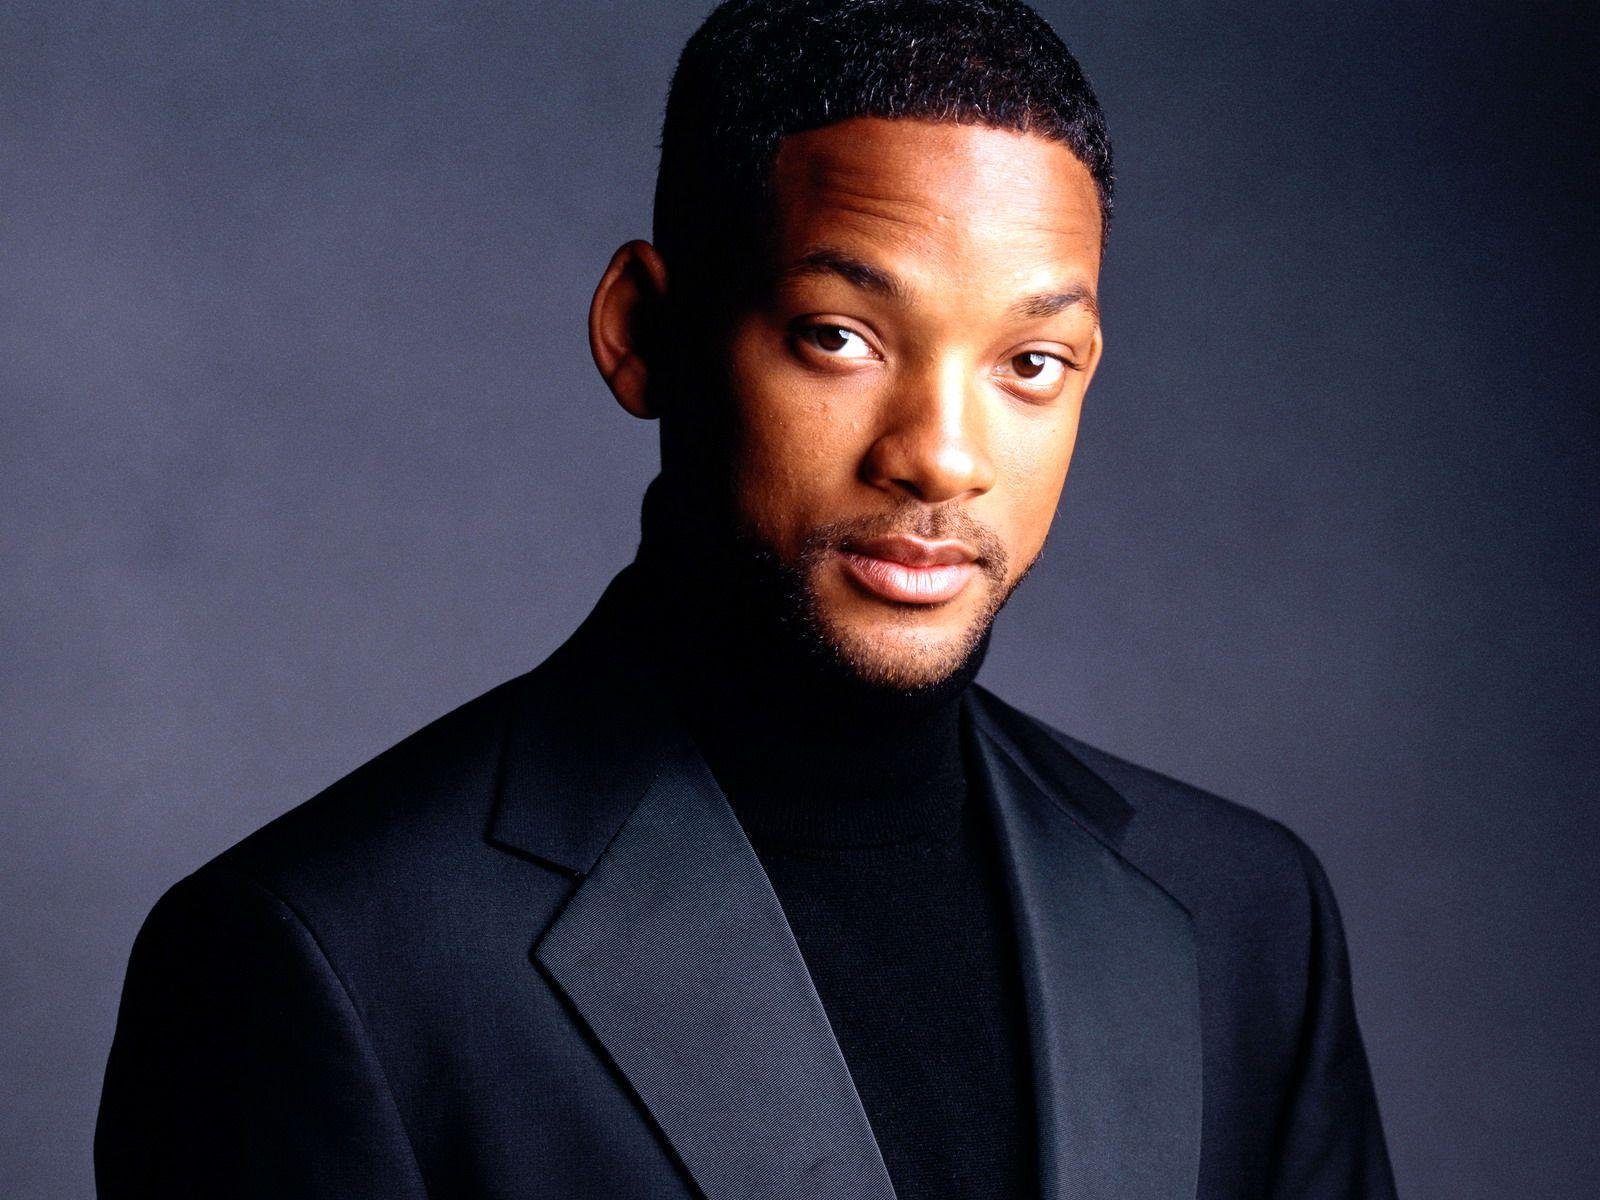 Will Smith Wallpaper High Resolution and Quality Download